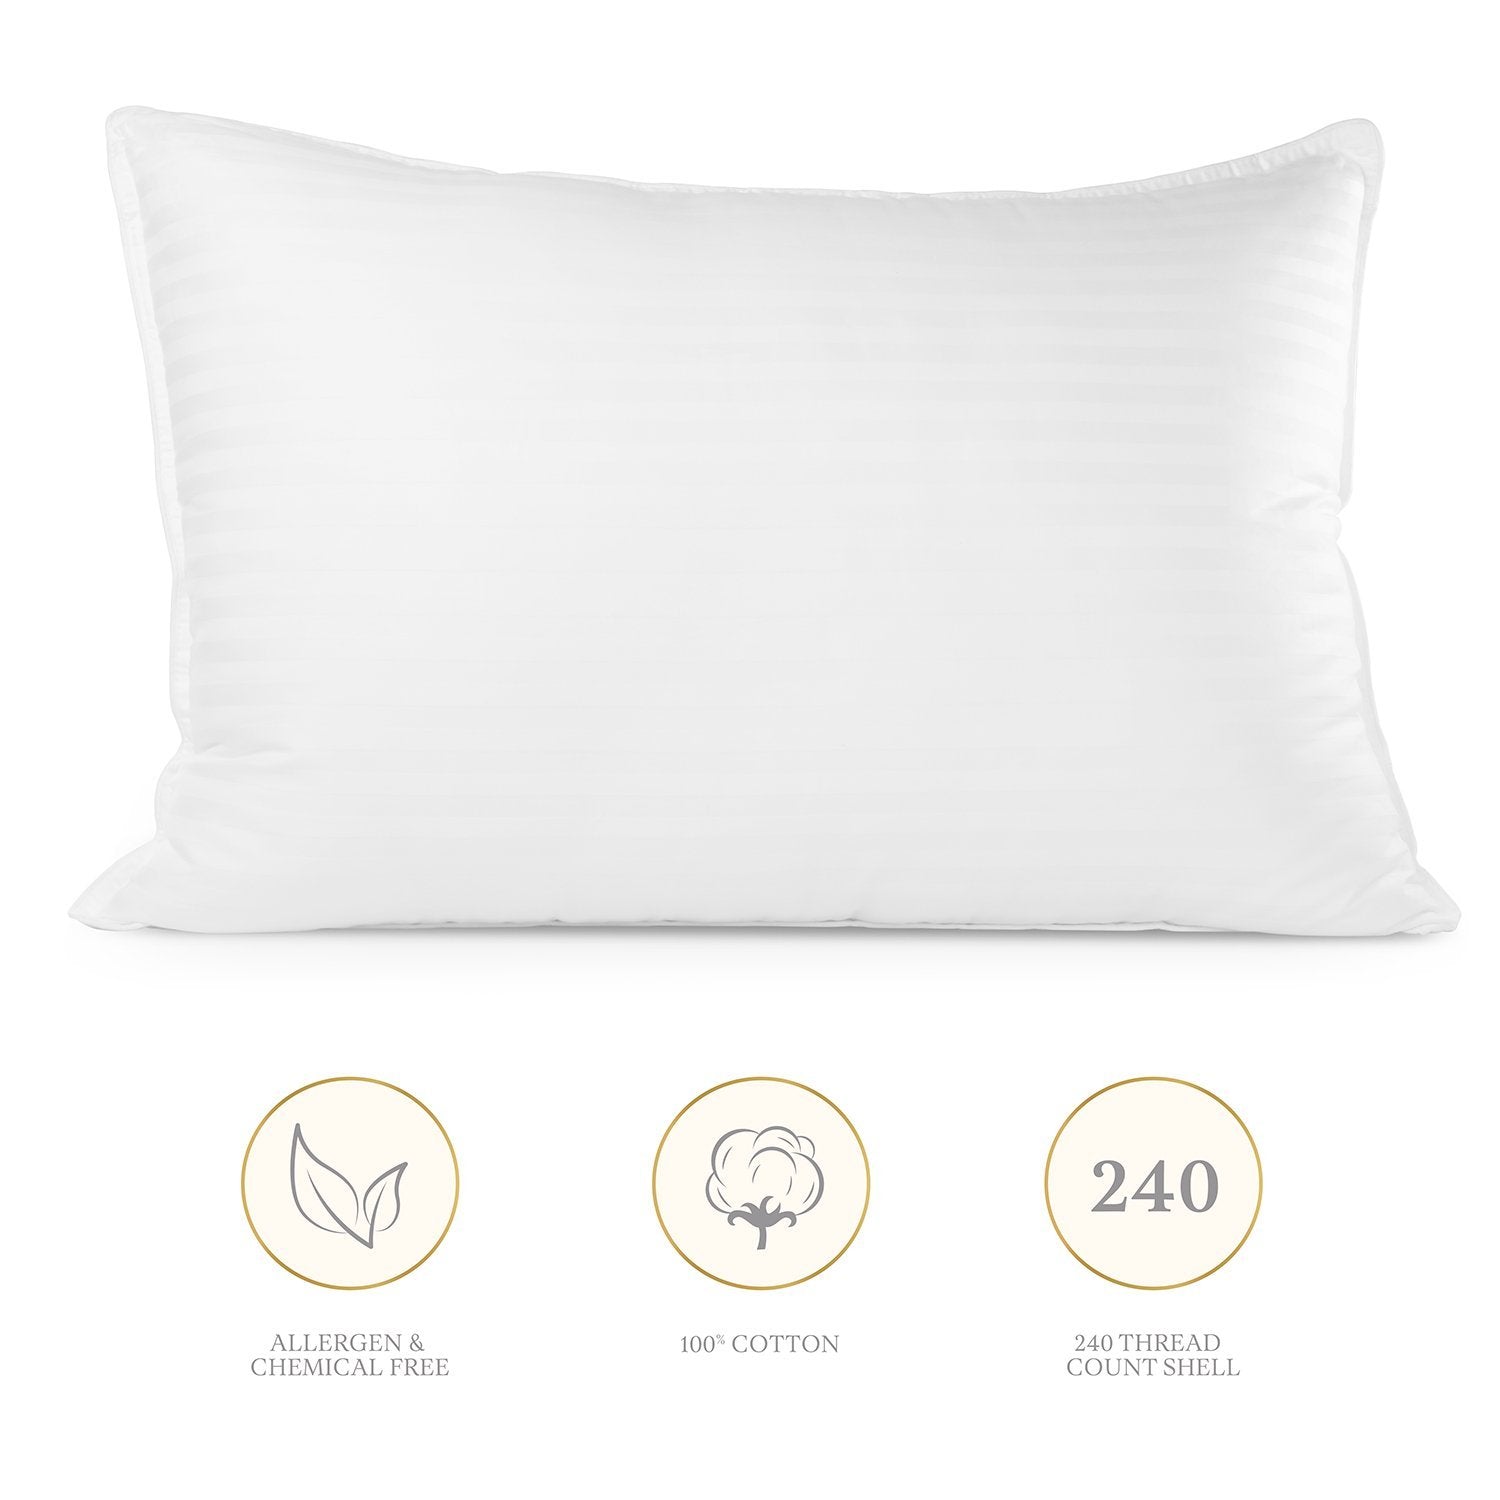 Beckham Hotel Collection Gel Pillow (2-Pack) - Luxury Plush Gel Pillow –  Pete's Home Decor & Furnishings